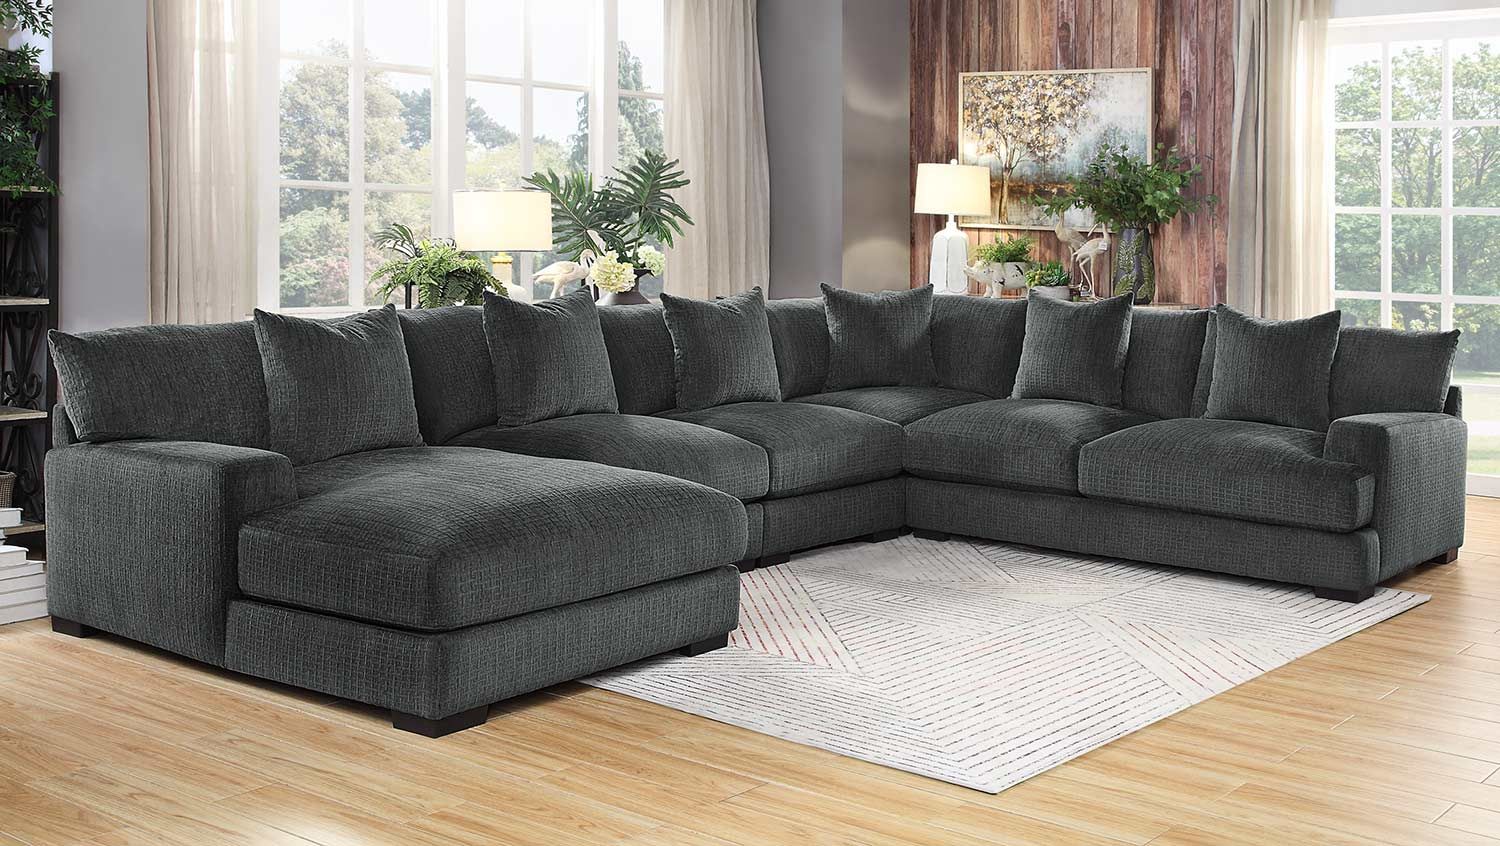 Homelegance Worchester Sectional Sofa Set – Dark Gray 9857dg Sofa Set Regarding Dark Gray Sectional Sofas (View 2 of 20)